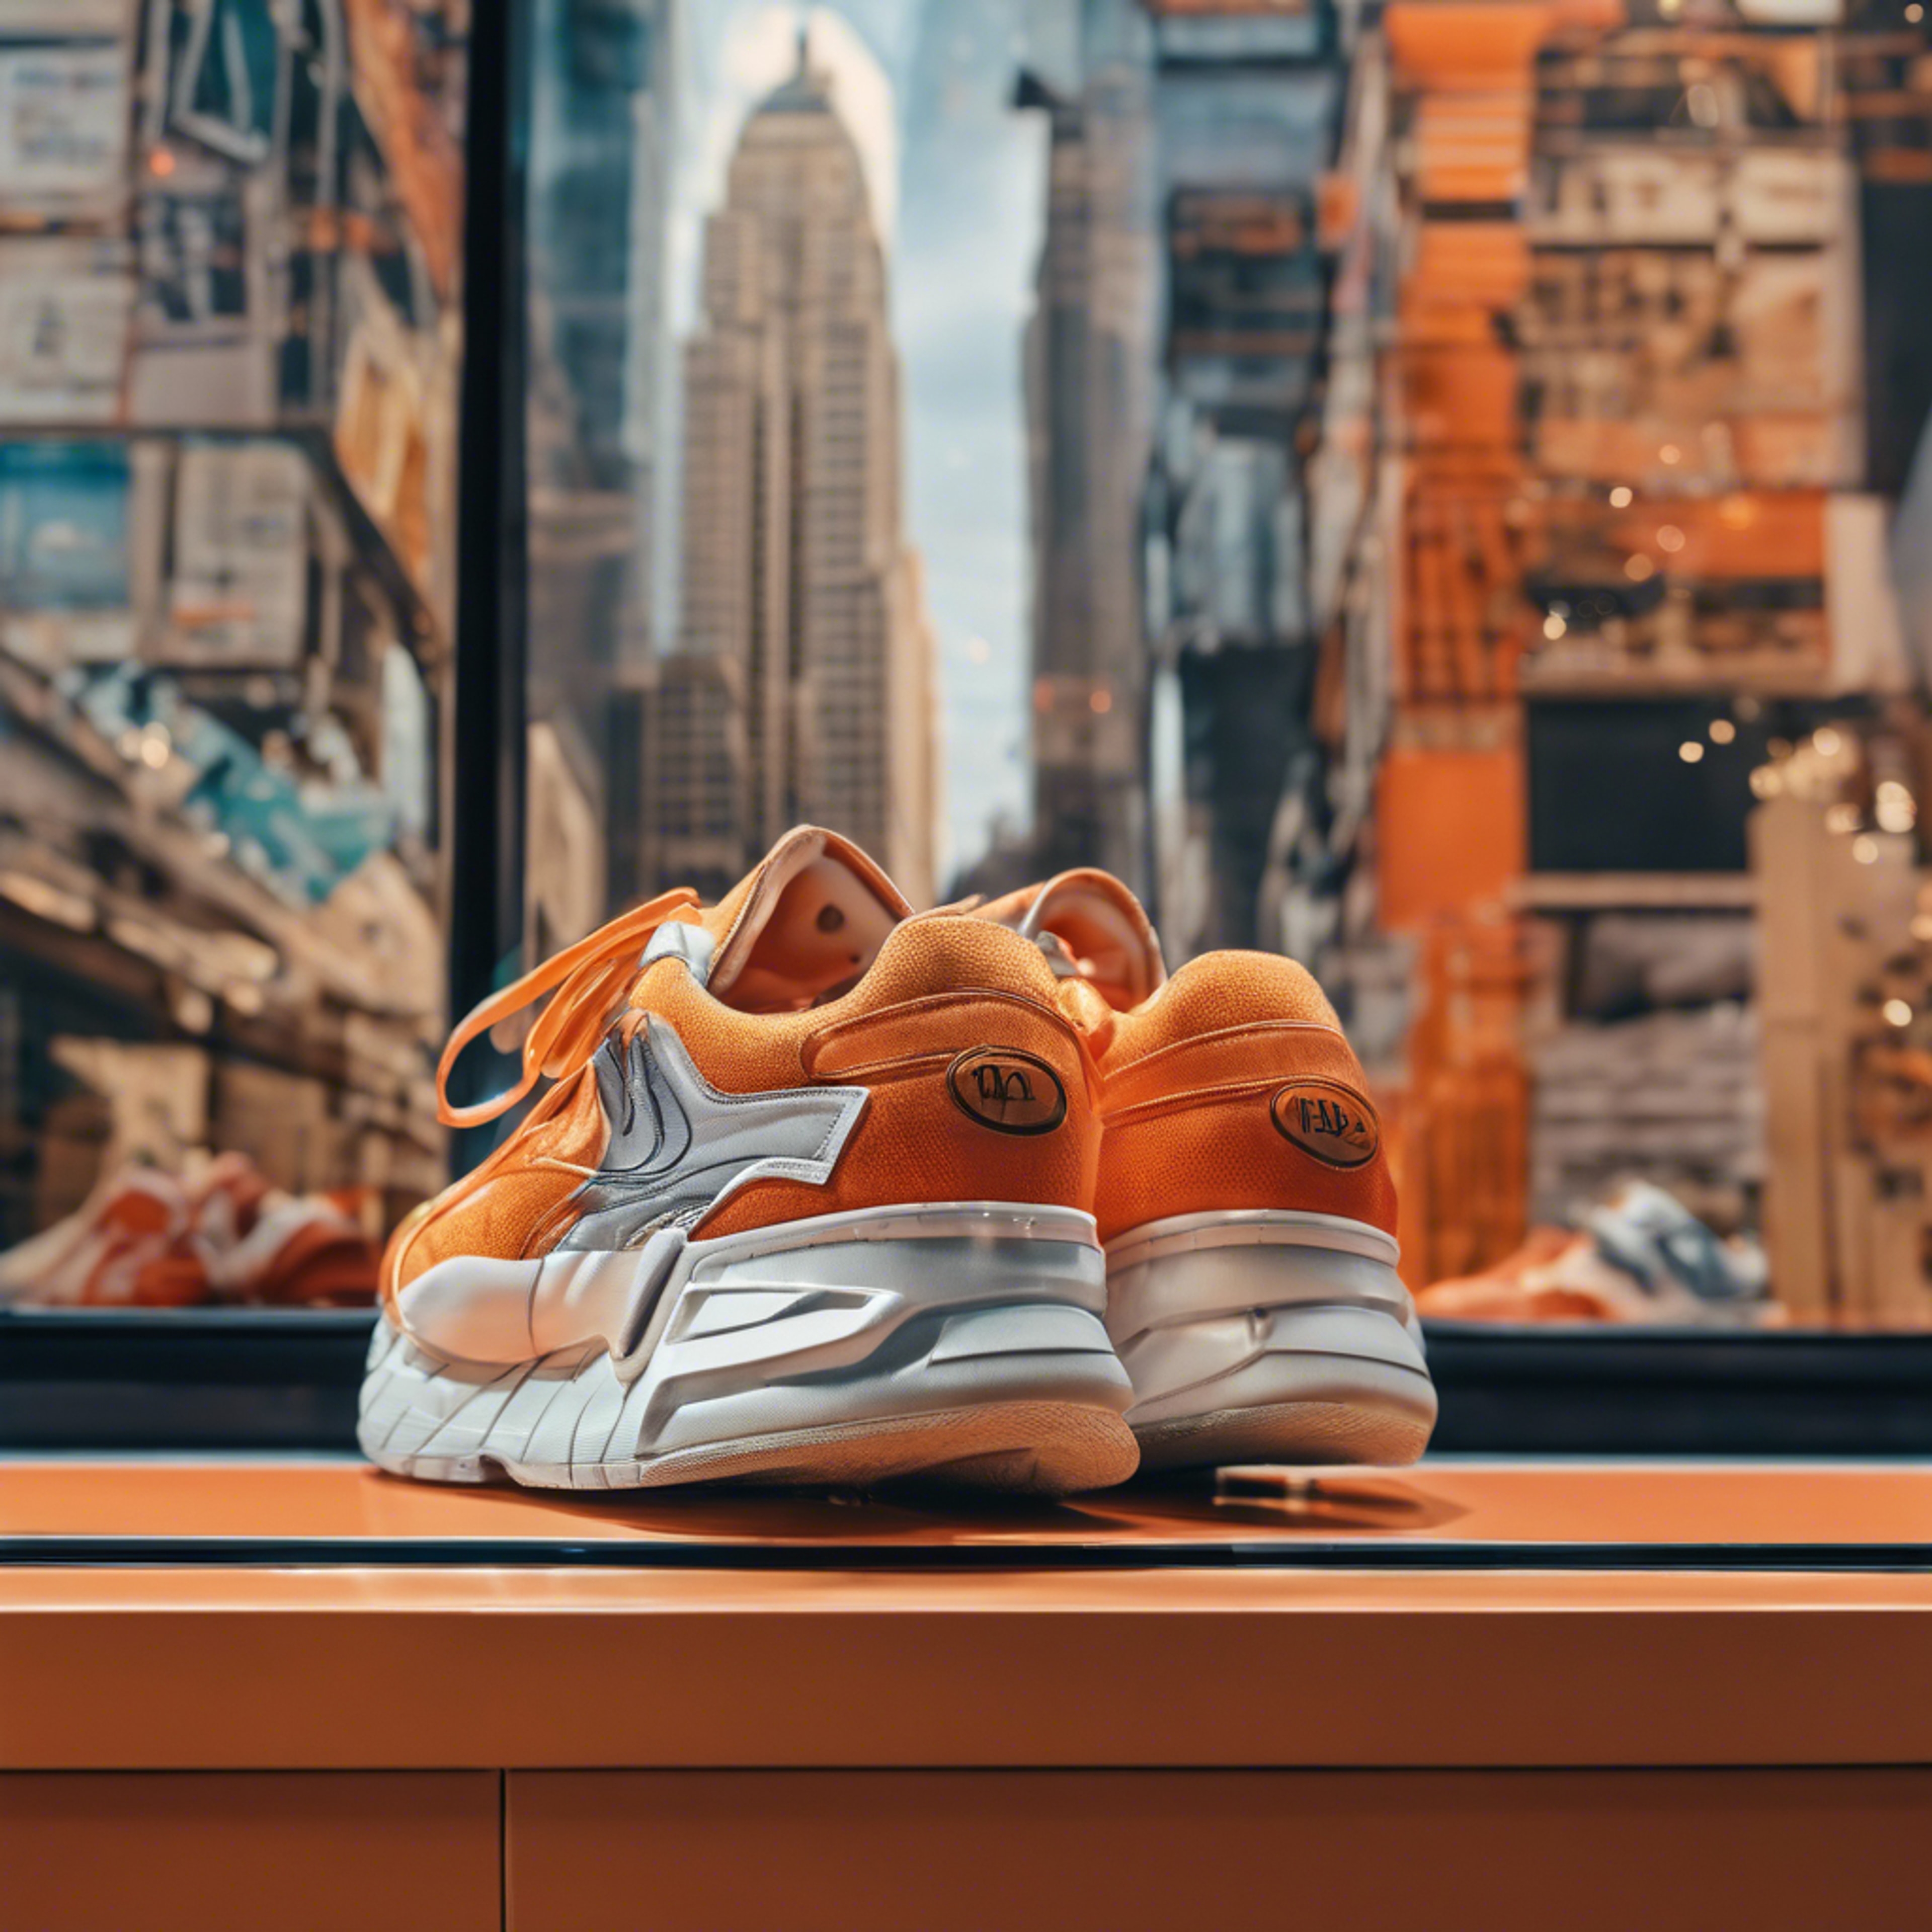 Orange Y2K-inspired sneakers displayed in a shoe store window with a retro cityscape backdrop. 墙纸[c42ef01953ac4184b365]